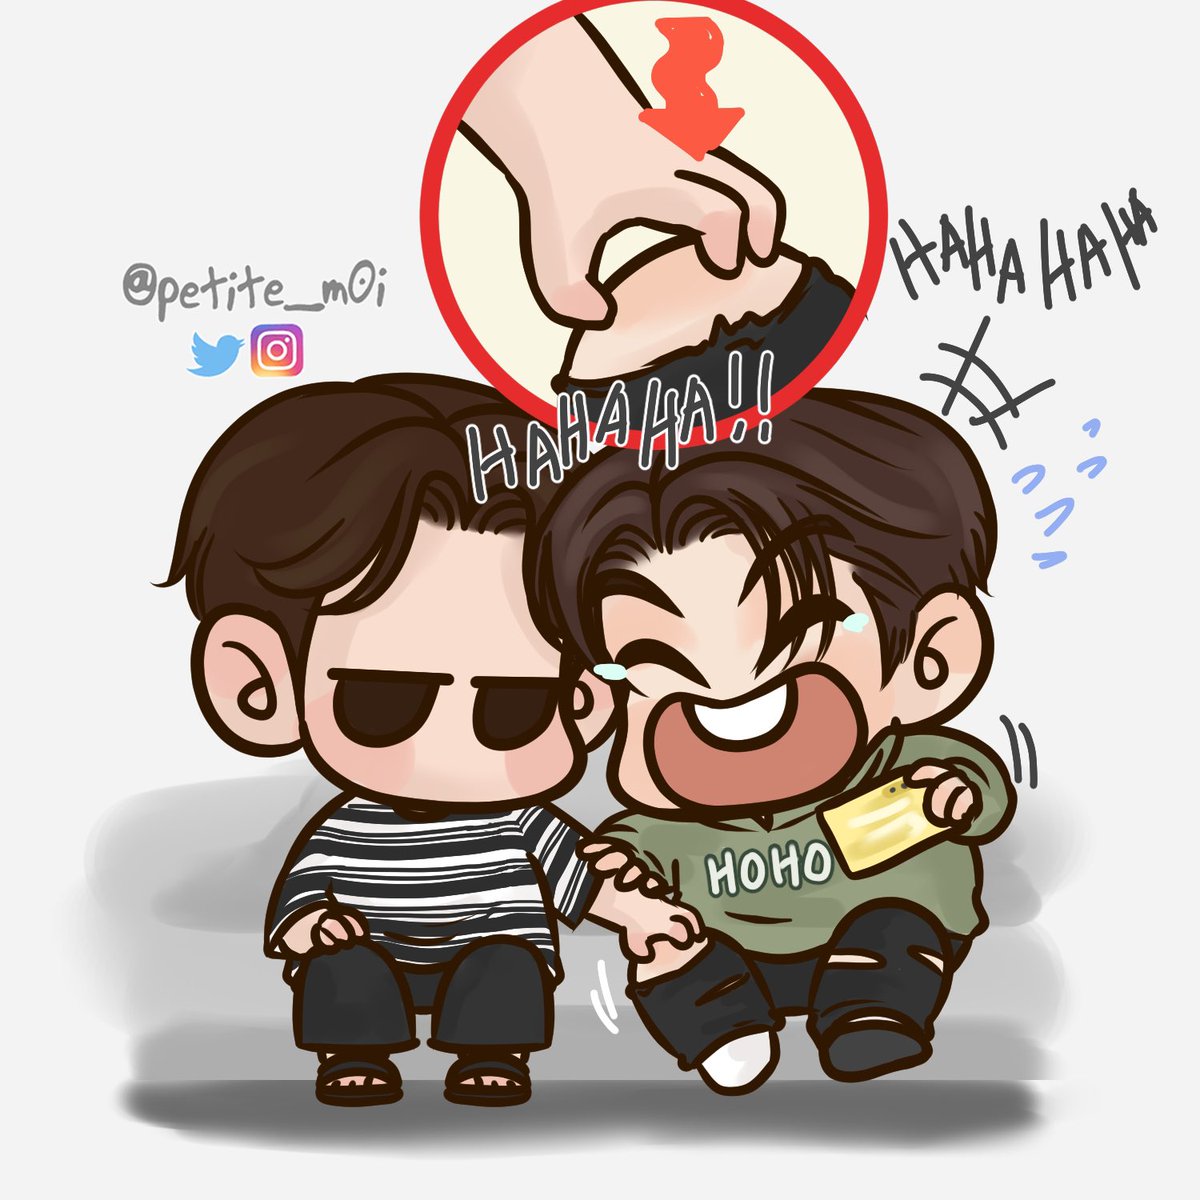 They say one will tend to tease another in other to get their attention🌚

#brightwin #snowballpower #ไบร์ทวิน #bbrightvc #winmetawin #CLIPSTUDIOPAINT #petitem0i